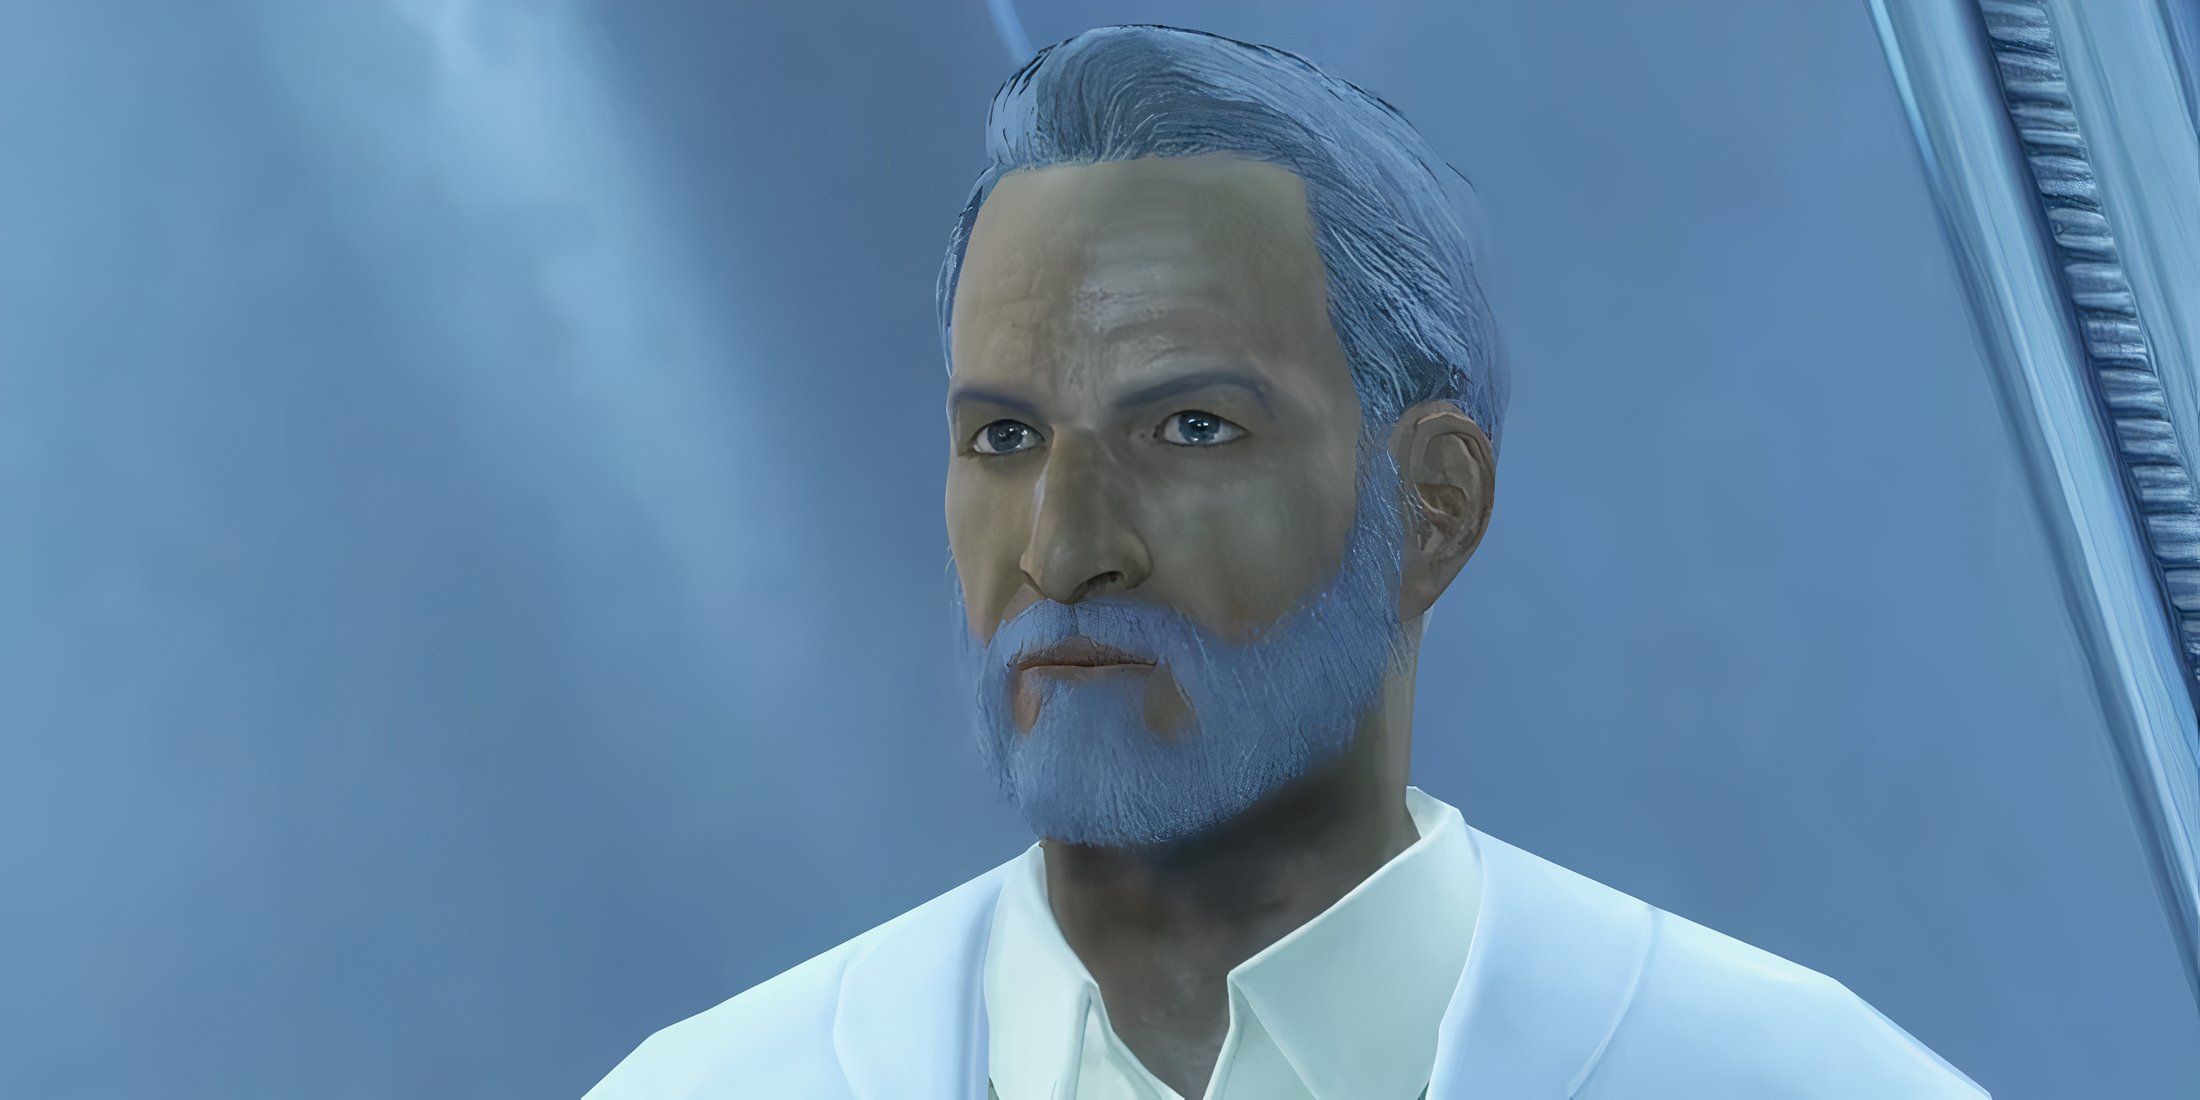 Father from Fallout 4's Institute faction